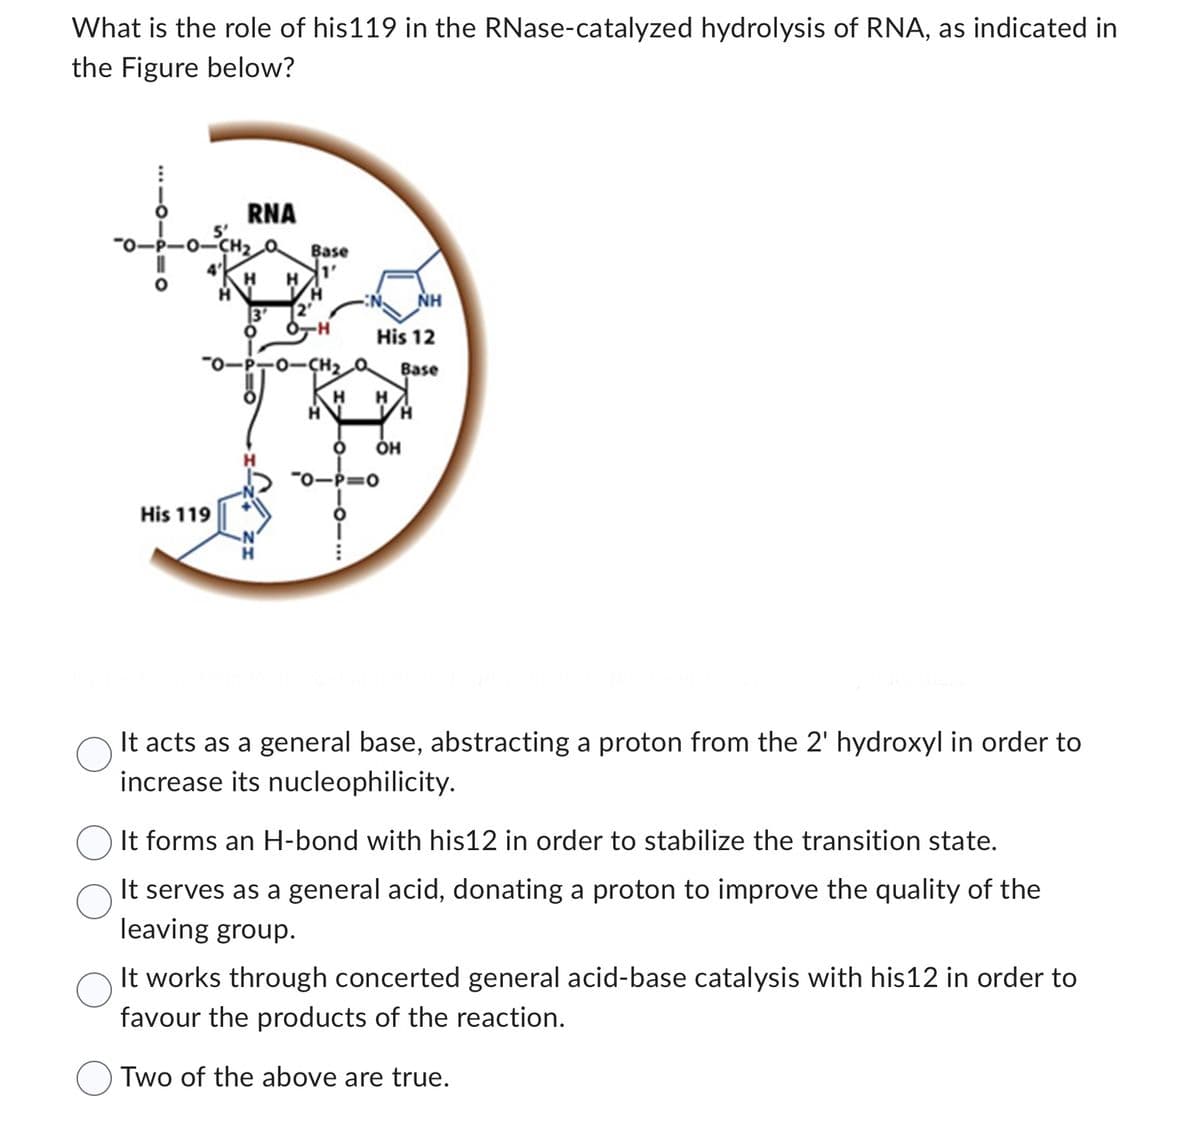 What is the role of his119 in the RNase-catalyzed hydrolysis of RNA, as indicated in
the Figure below?
RNA
-0-CH₂ Q Base
His 119
H H
NH
His 12
-P-0-CH₂ a Base
H H
3'
H
O
2'
O-H
OH
O
-0-P=0
It acts as a general base, abstracting a proton from the 2' hydroxyl in order to
increase its nucleophilicity.
It forms an H-bond with his12 in order to stabilize the transition state.
It serves as a general acid, donating a proton to improve the quality of the
leaving group.
It works through concerted general acid-base catalysis with his 12 in order to
favour the products of the reaction.
Two of the above are true.